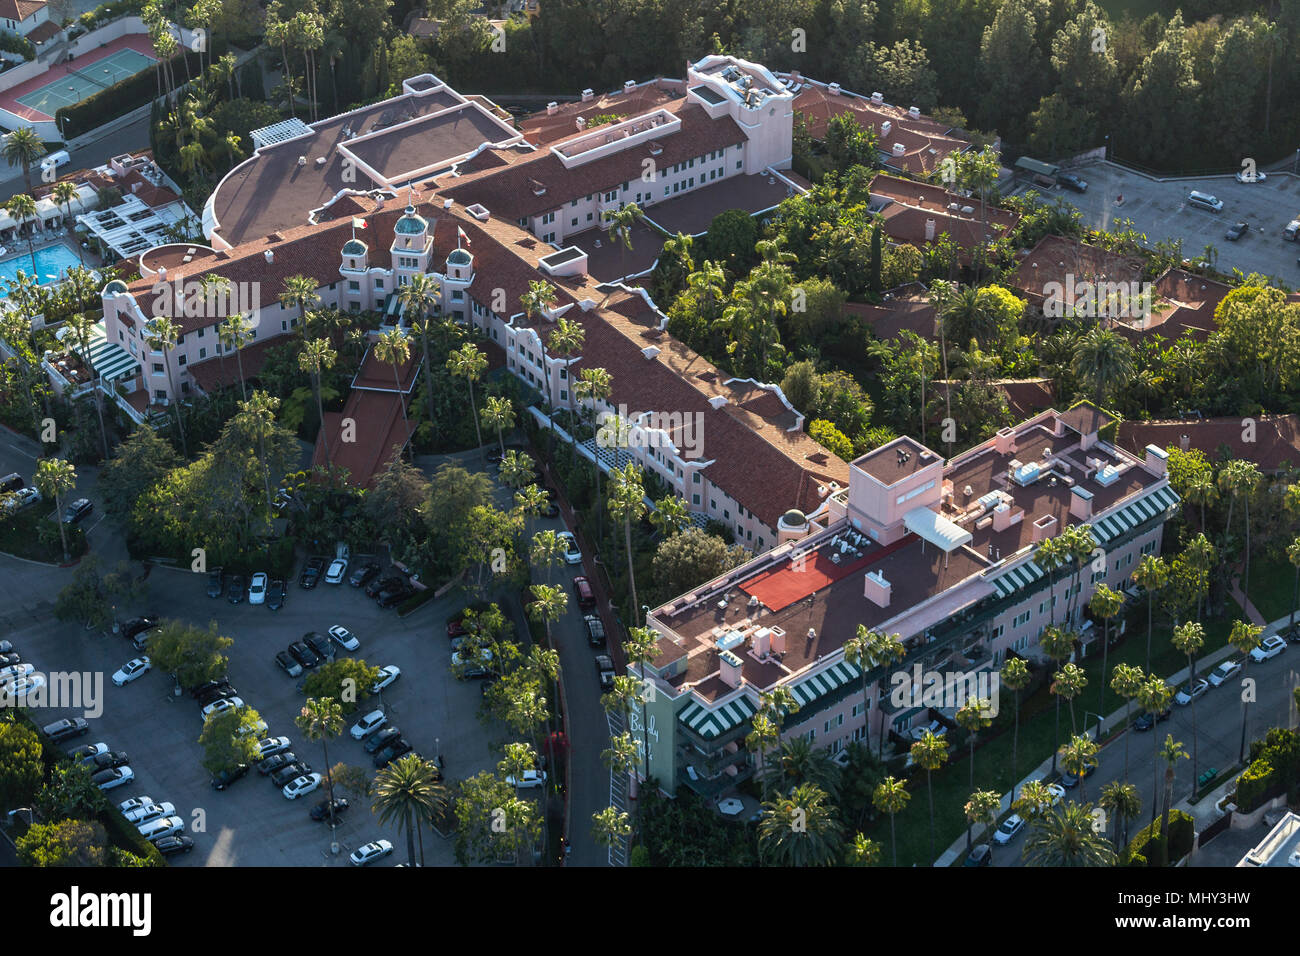 Beverly Hills, California, USA - April 18, 2018:  Aerial view of the historic, luxurious and stylish Beverly Hills Hotel near Los Angeles, California. Stock Photo